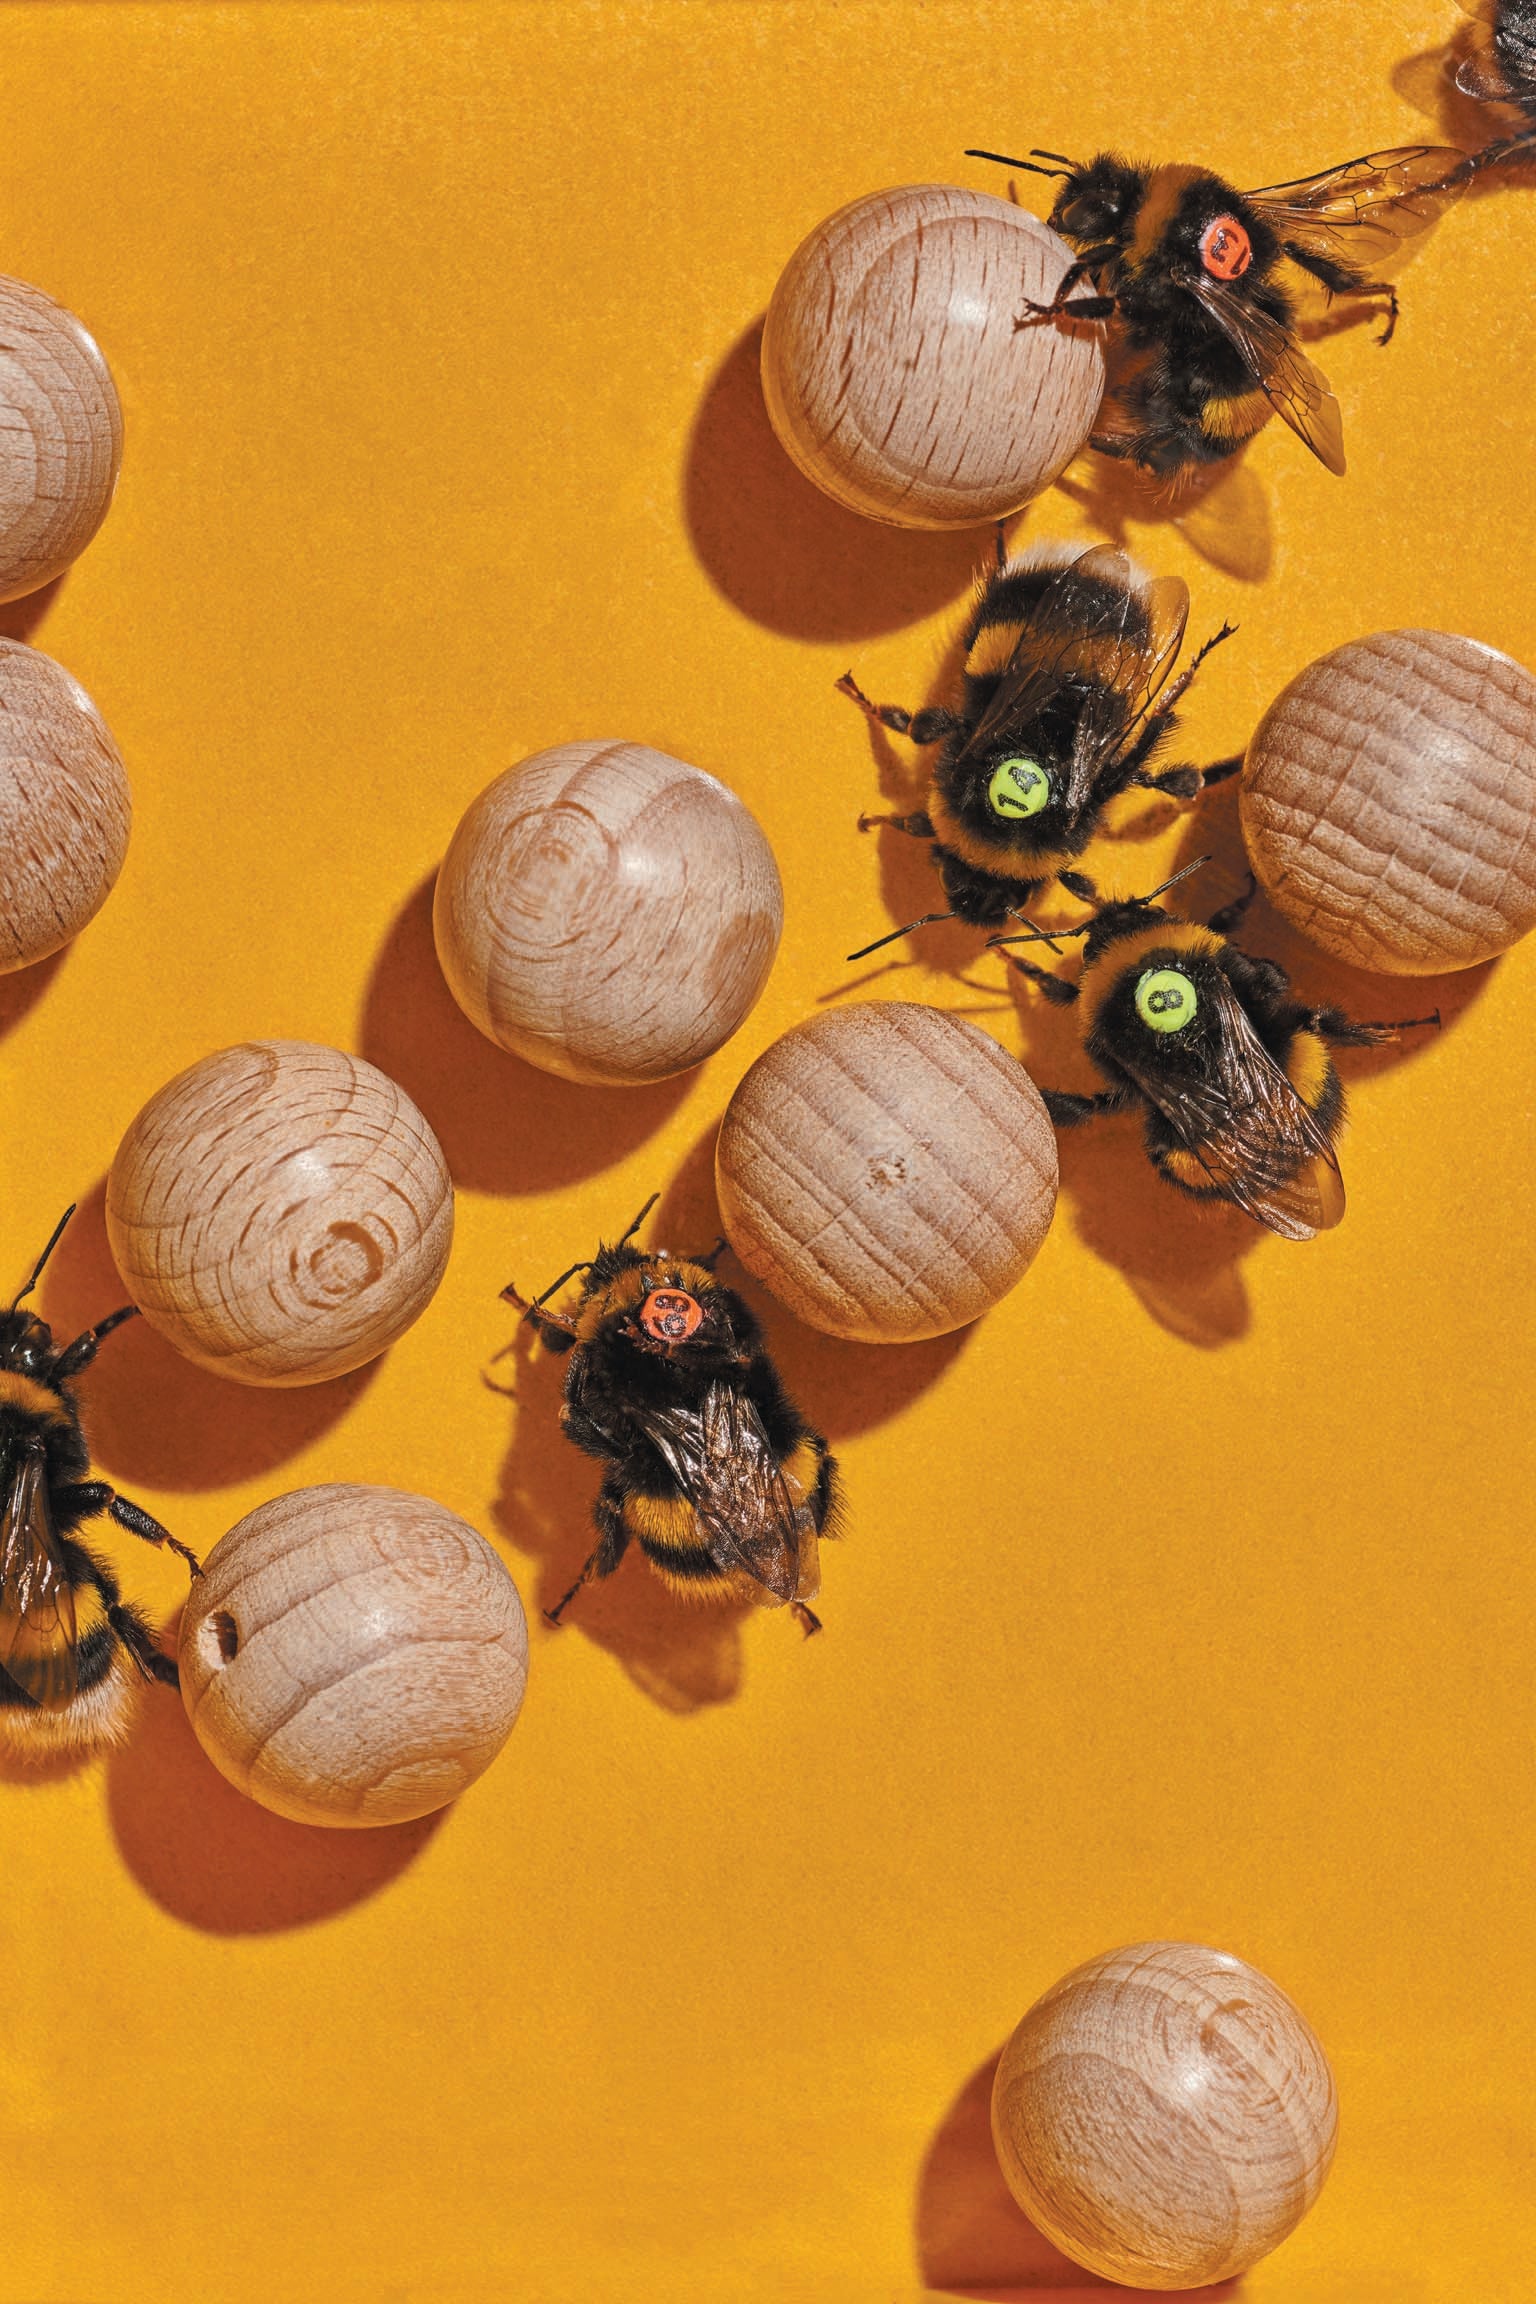 Bees with numbers, surrounded by wooden balls.